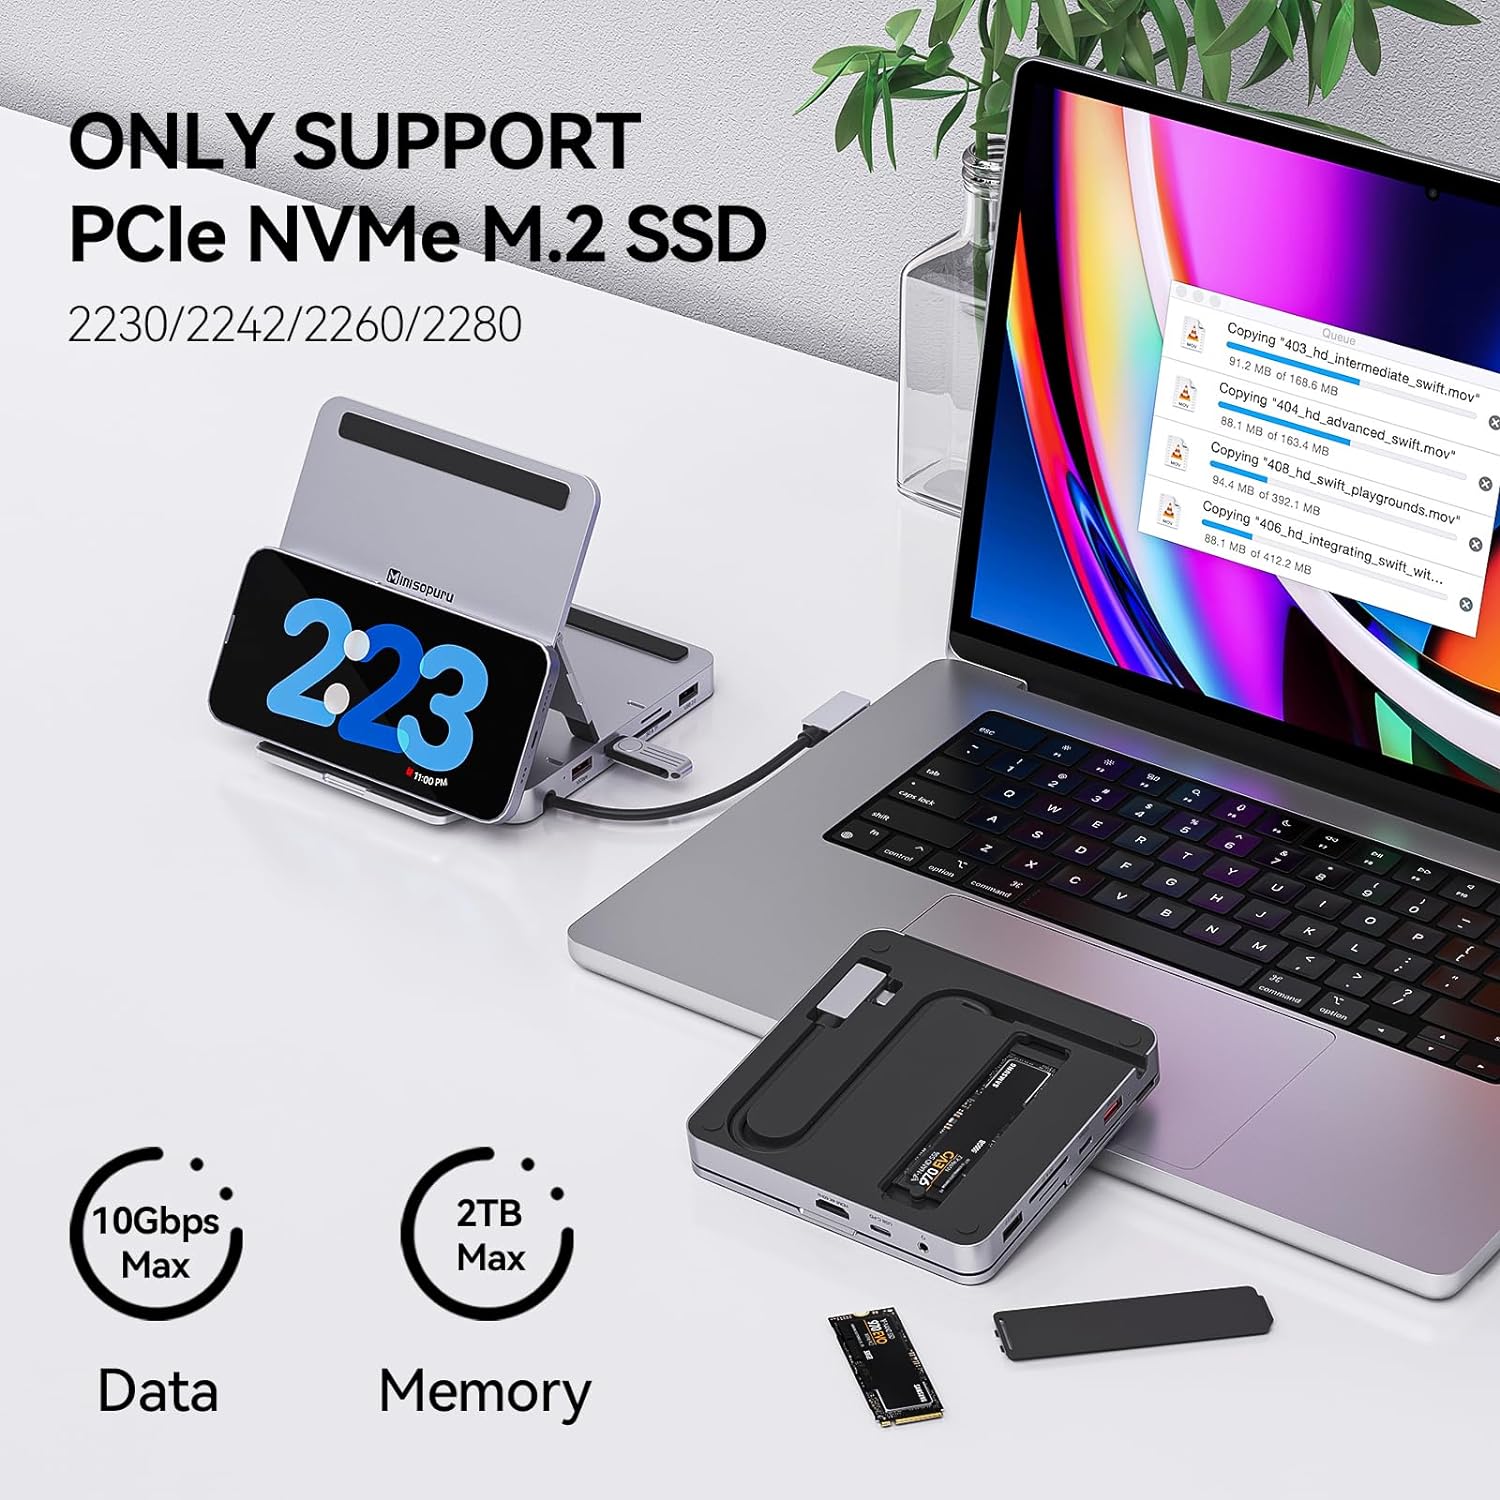 only support pcle nvme m.2 ssd